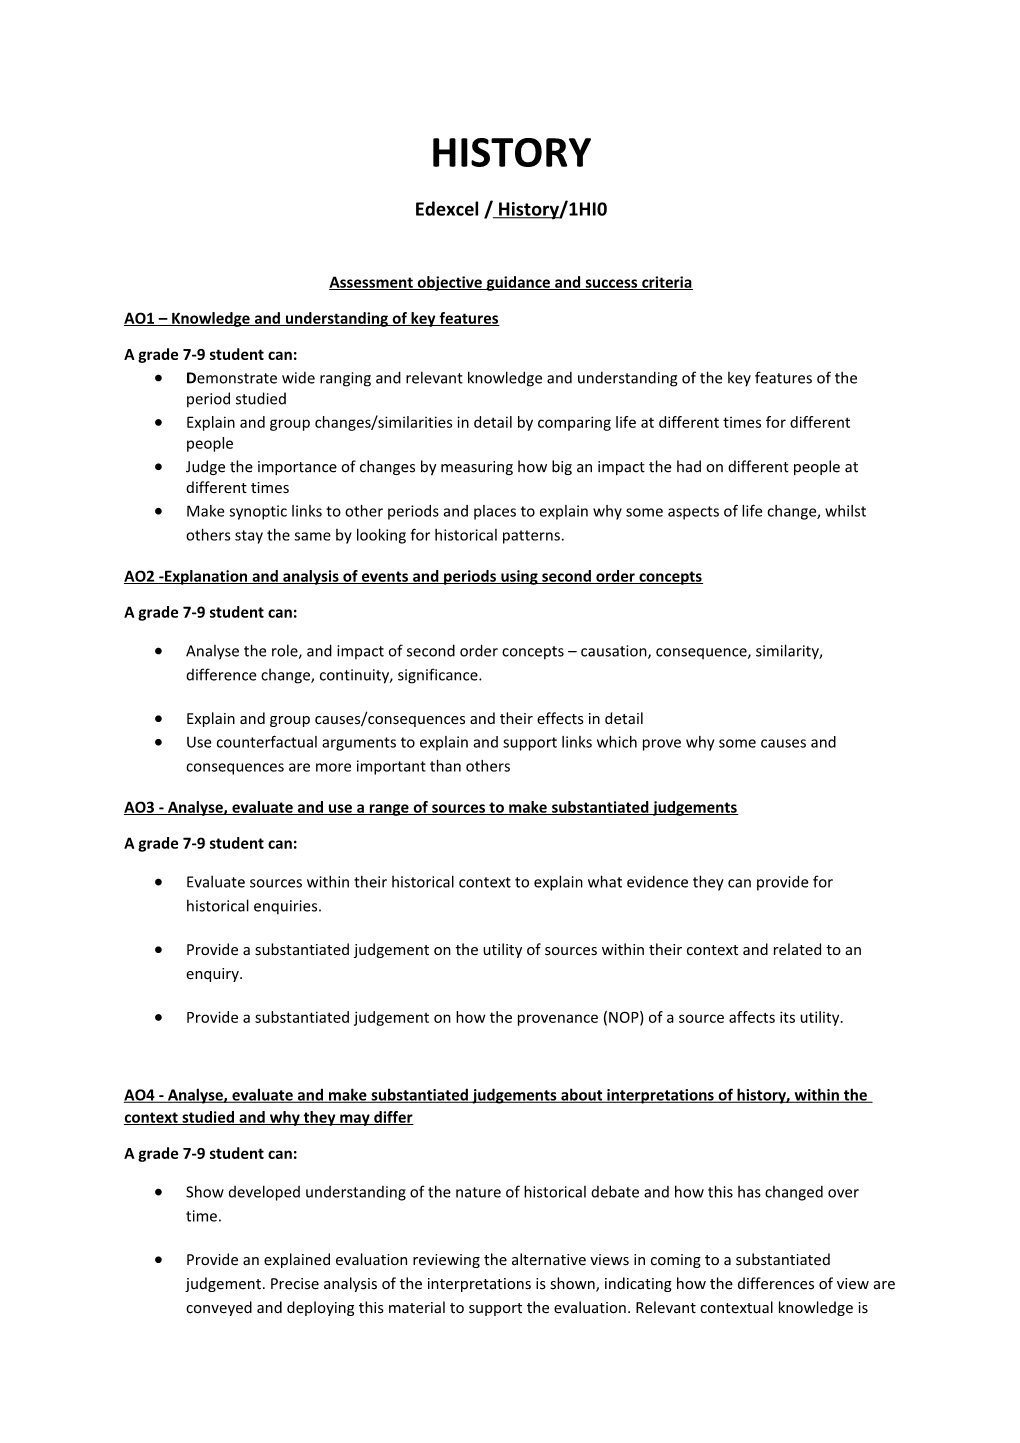 Assessment Objective Guidance and Success Criteria